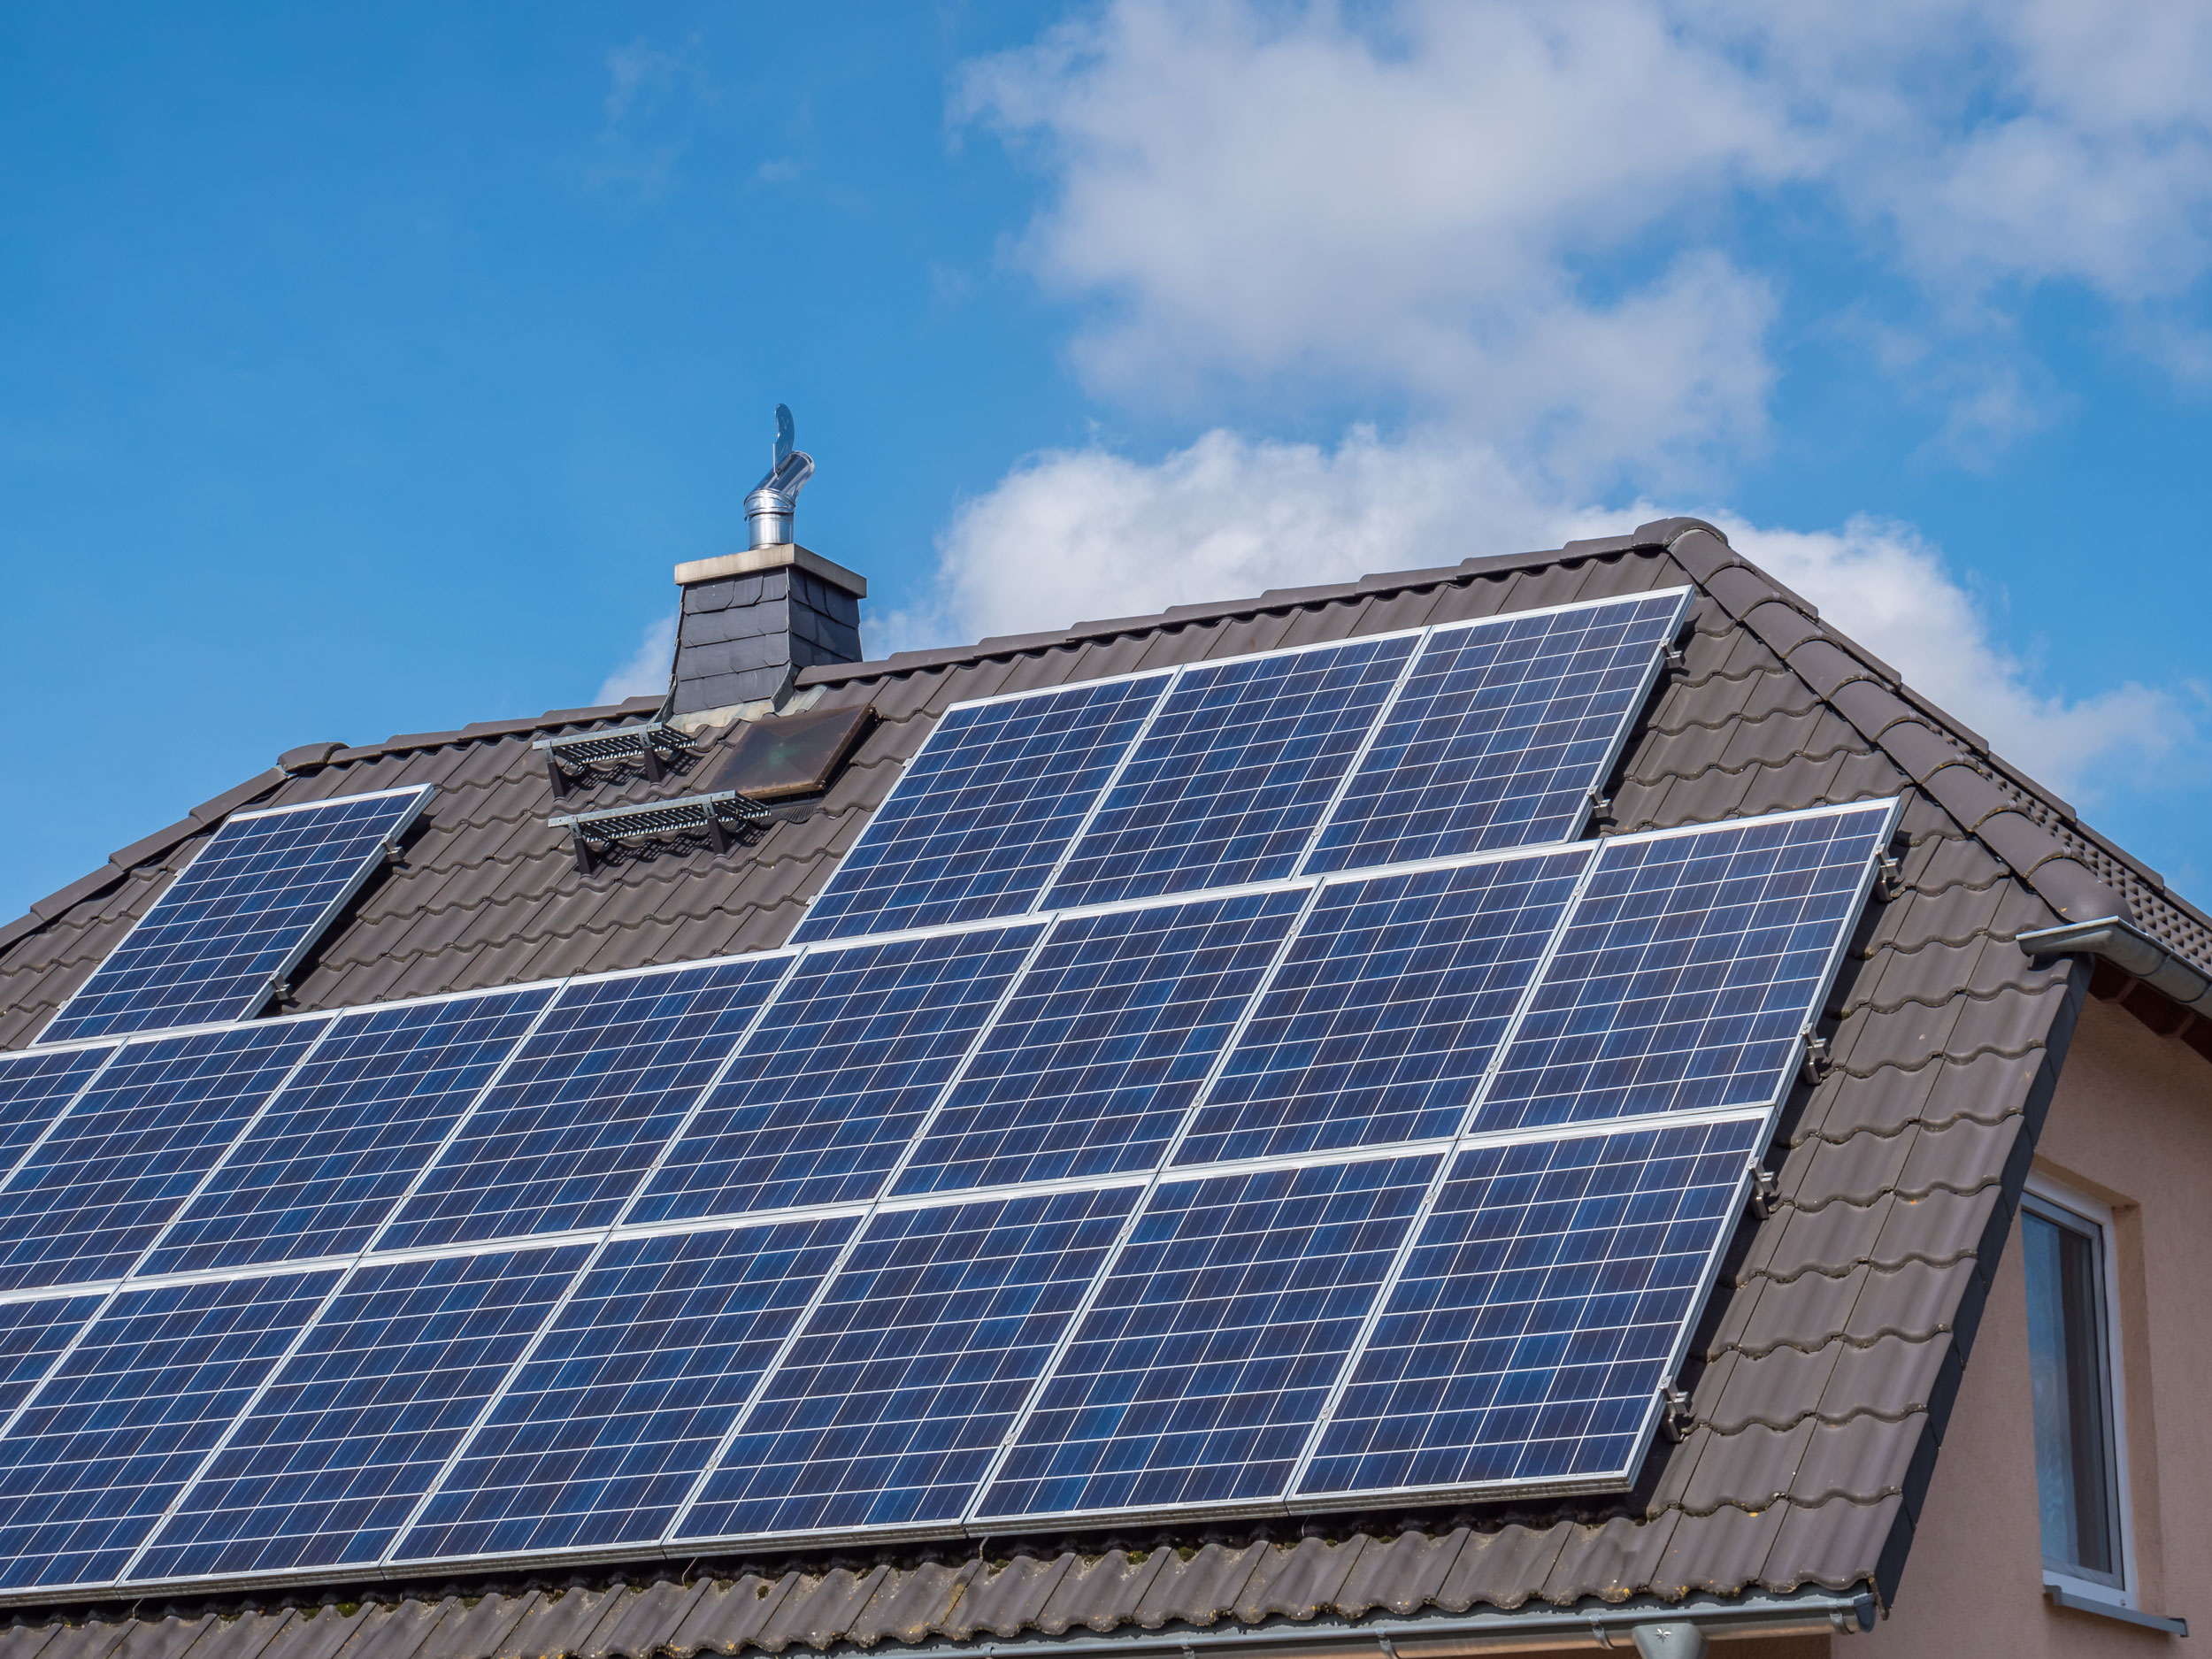 Advocating for a more inclusive federal ITC tax credit for rooftop solar savings